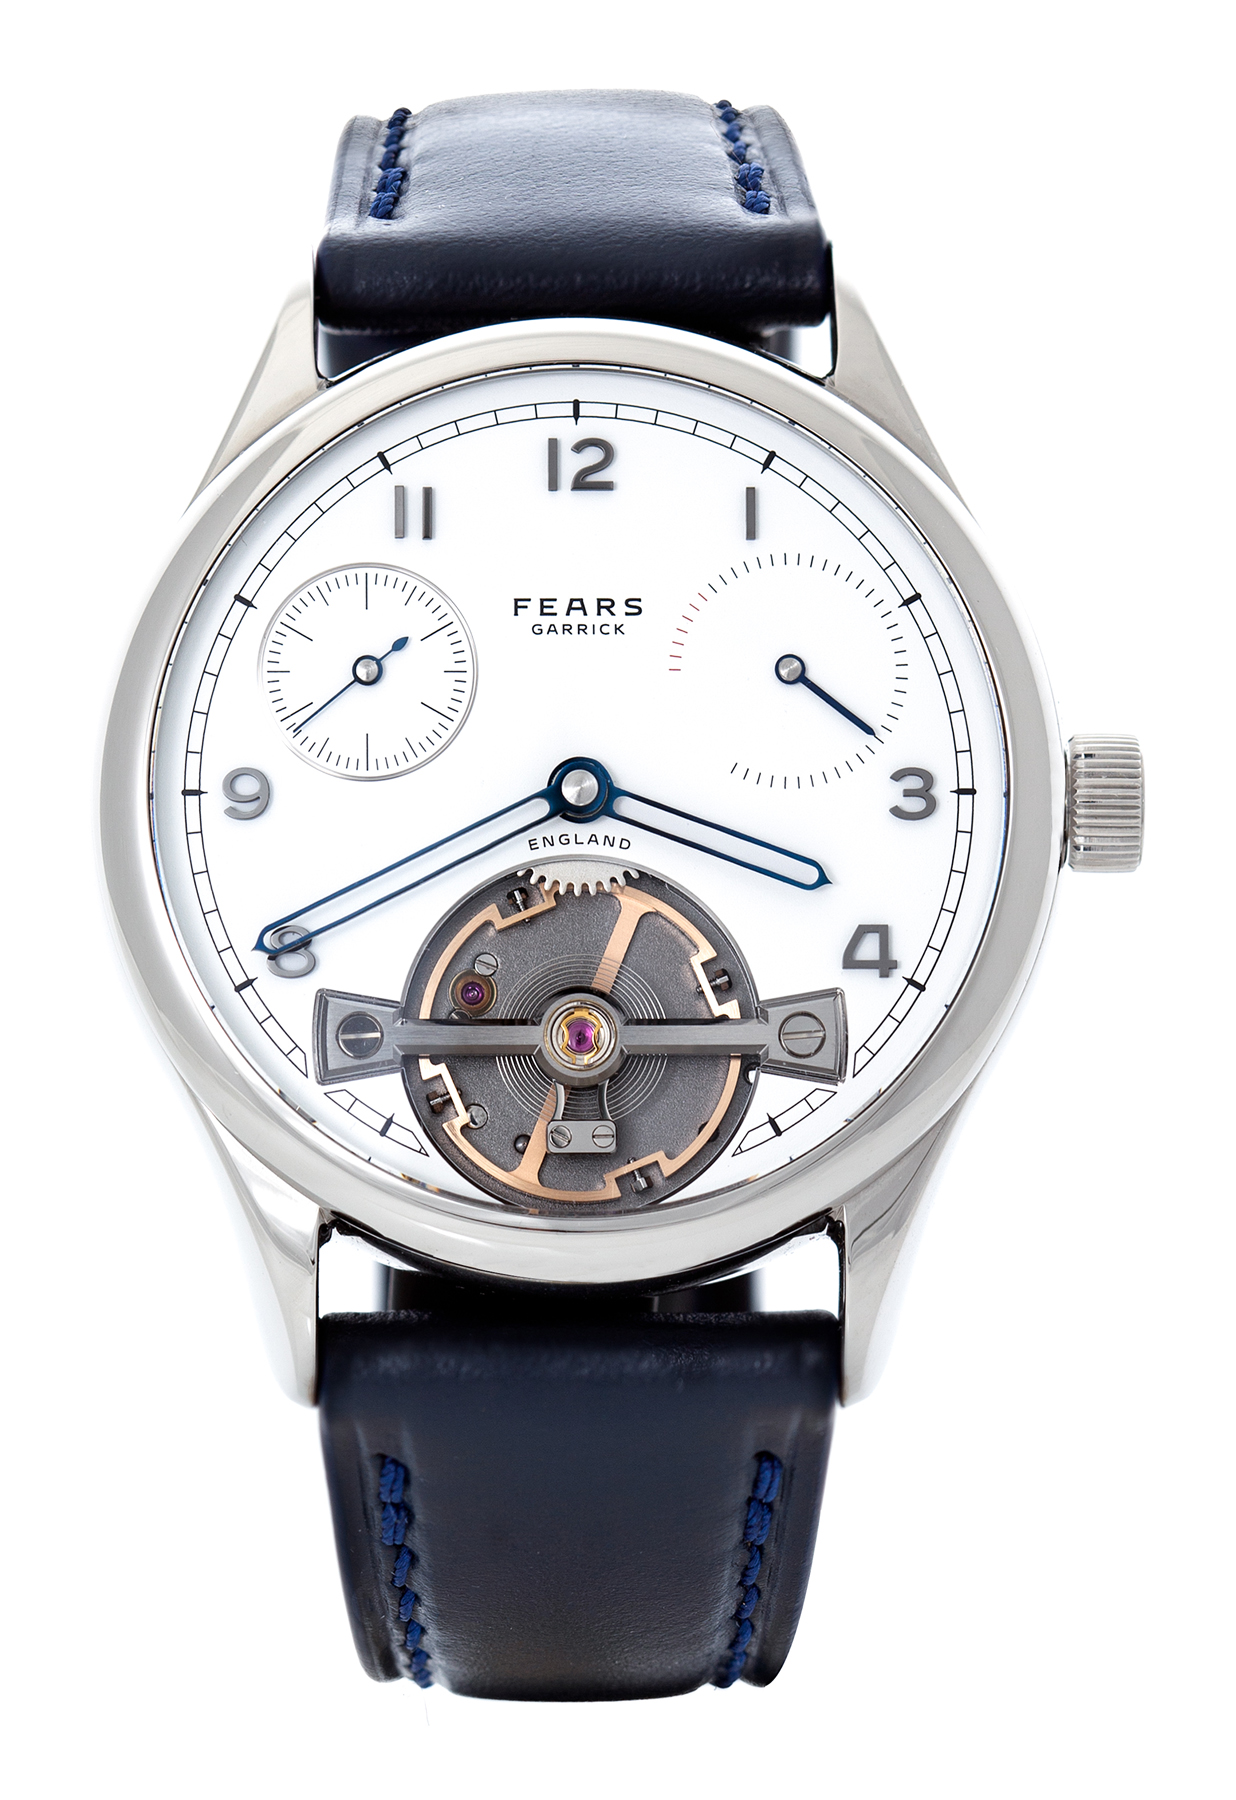 Fears garrick old english white dial on a fears blue strap